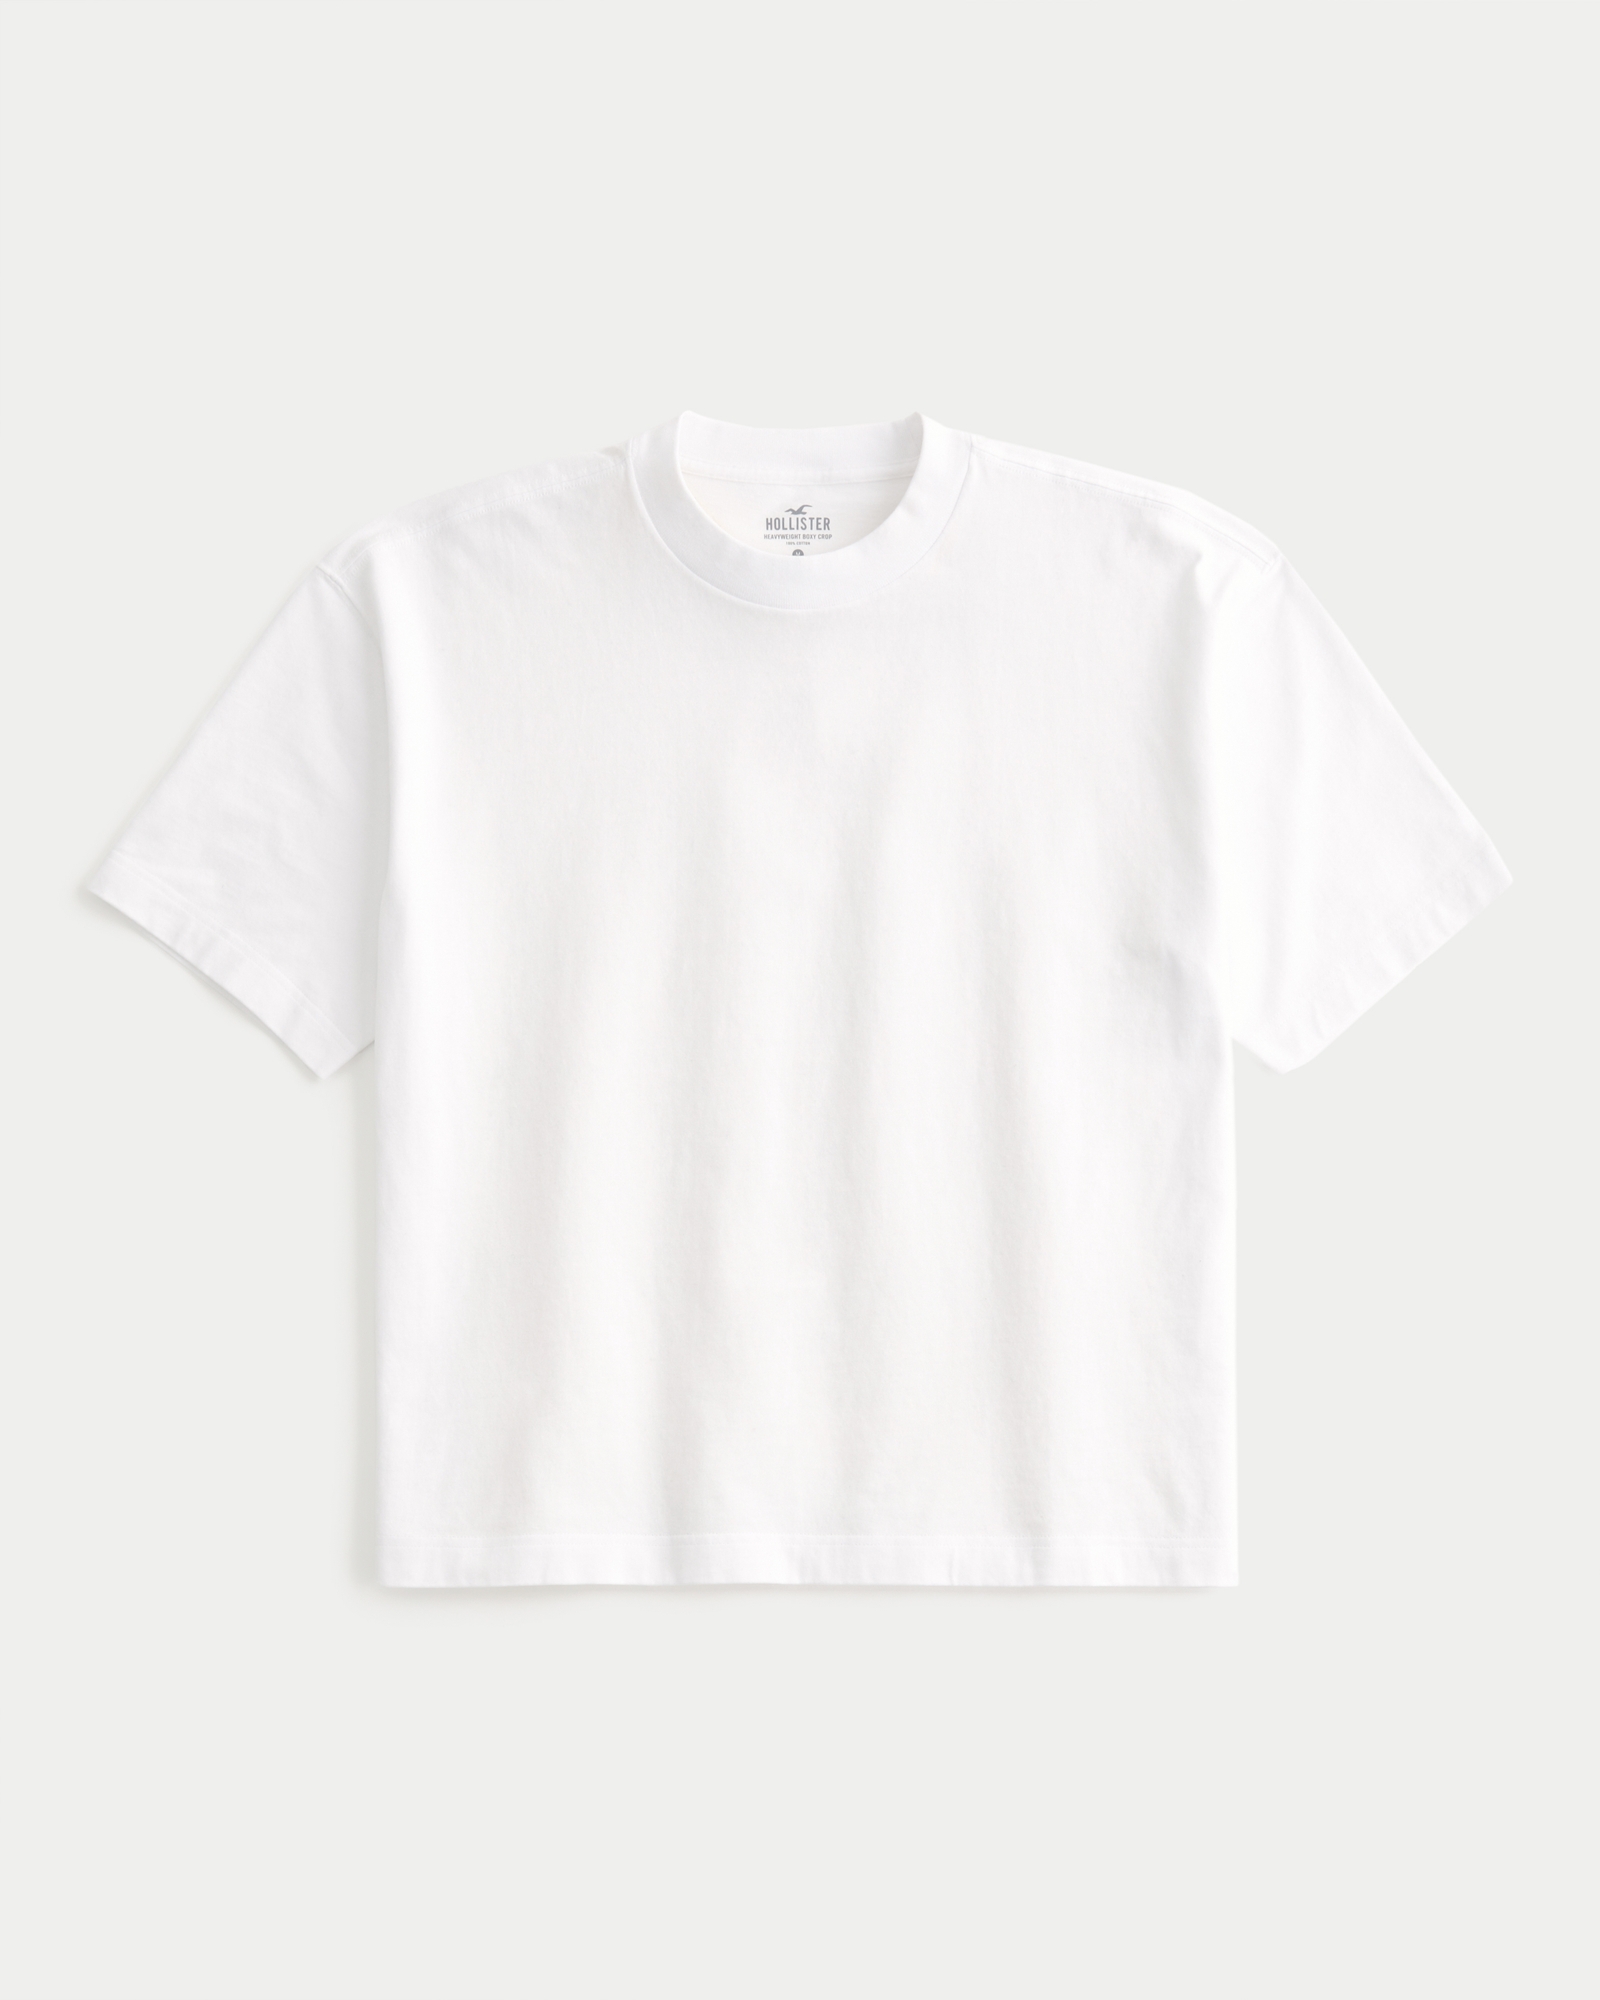 Hollister Co. 100% Cotton Tops & T-Shirts for Boys Sizes (4+)